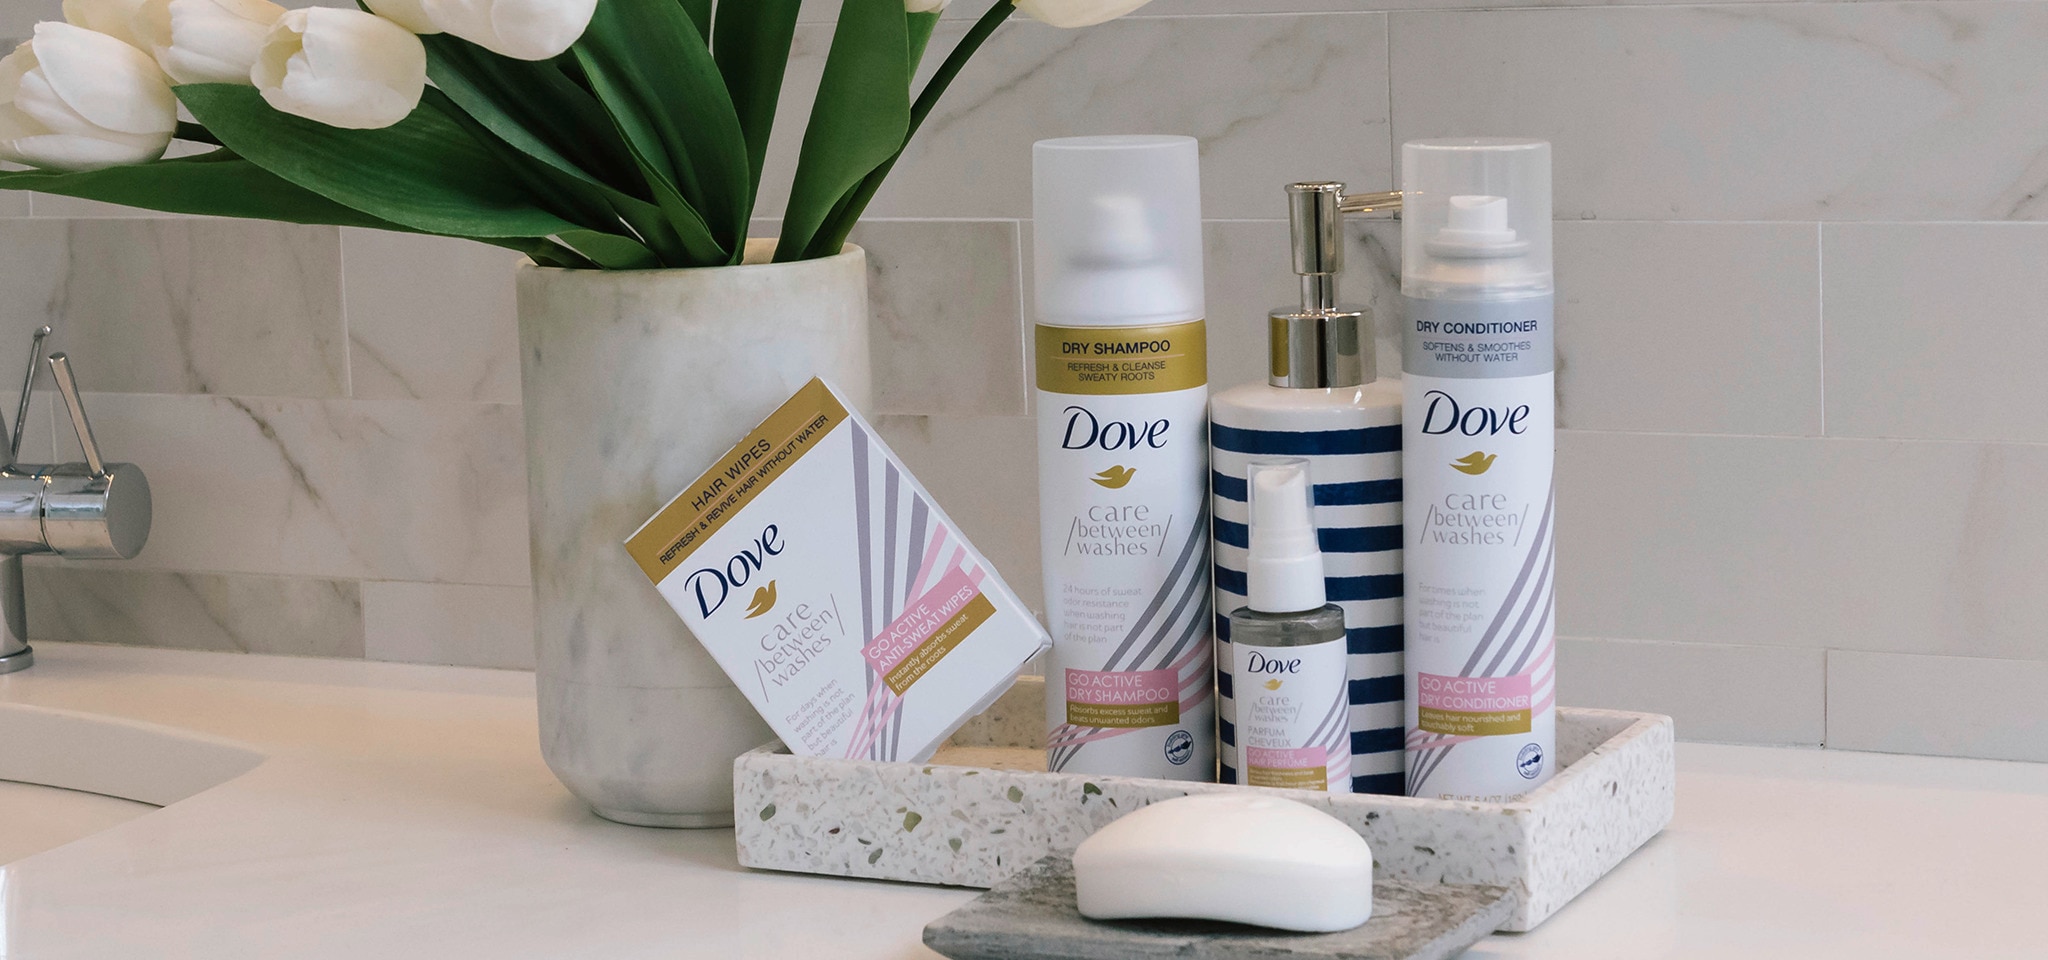 Dove - How to use dry shampoo spray and dry conditioner